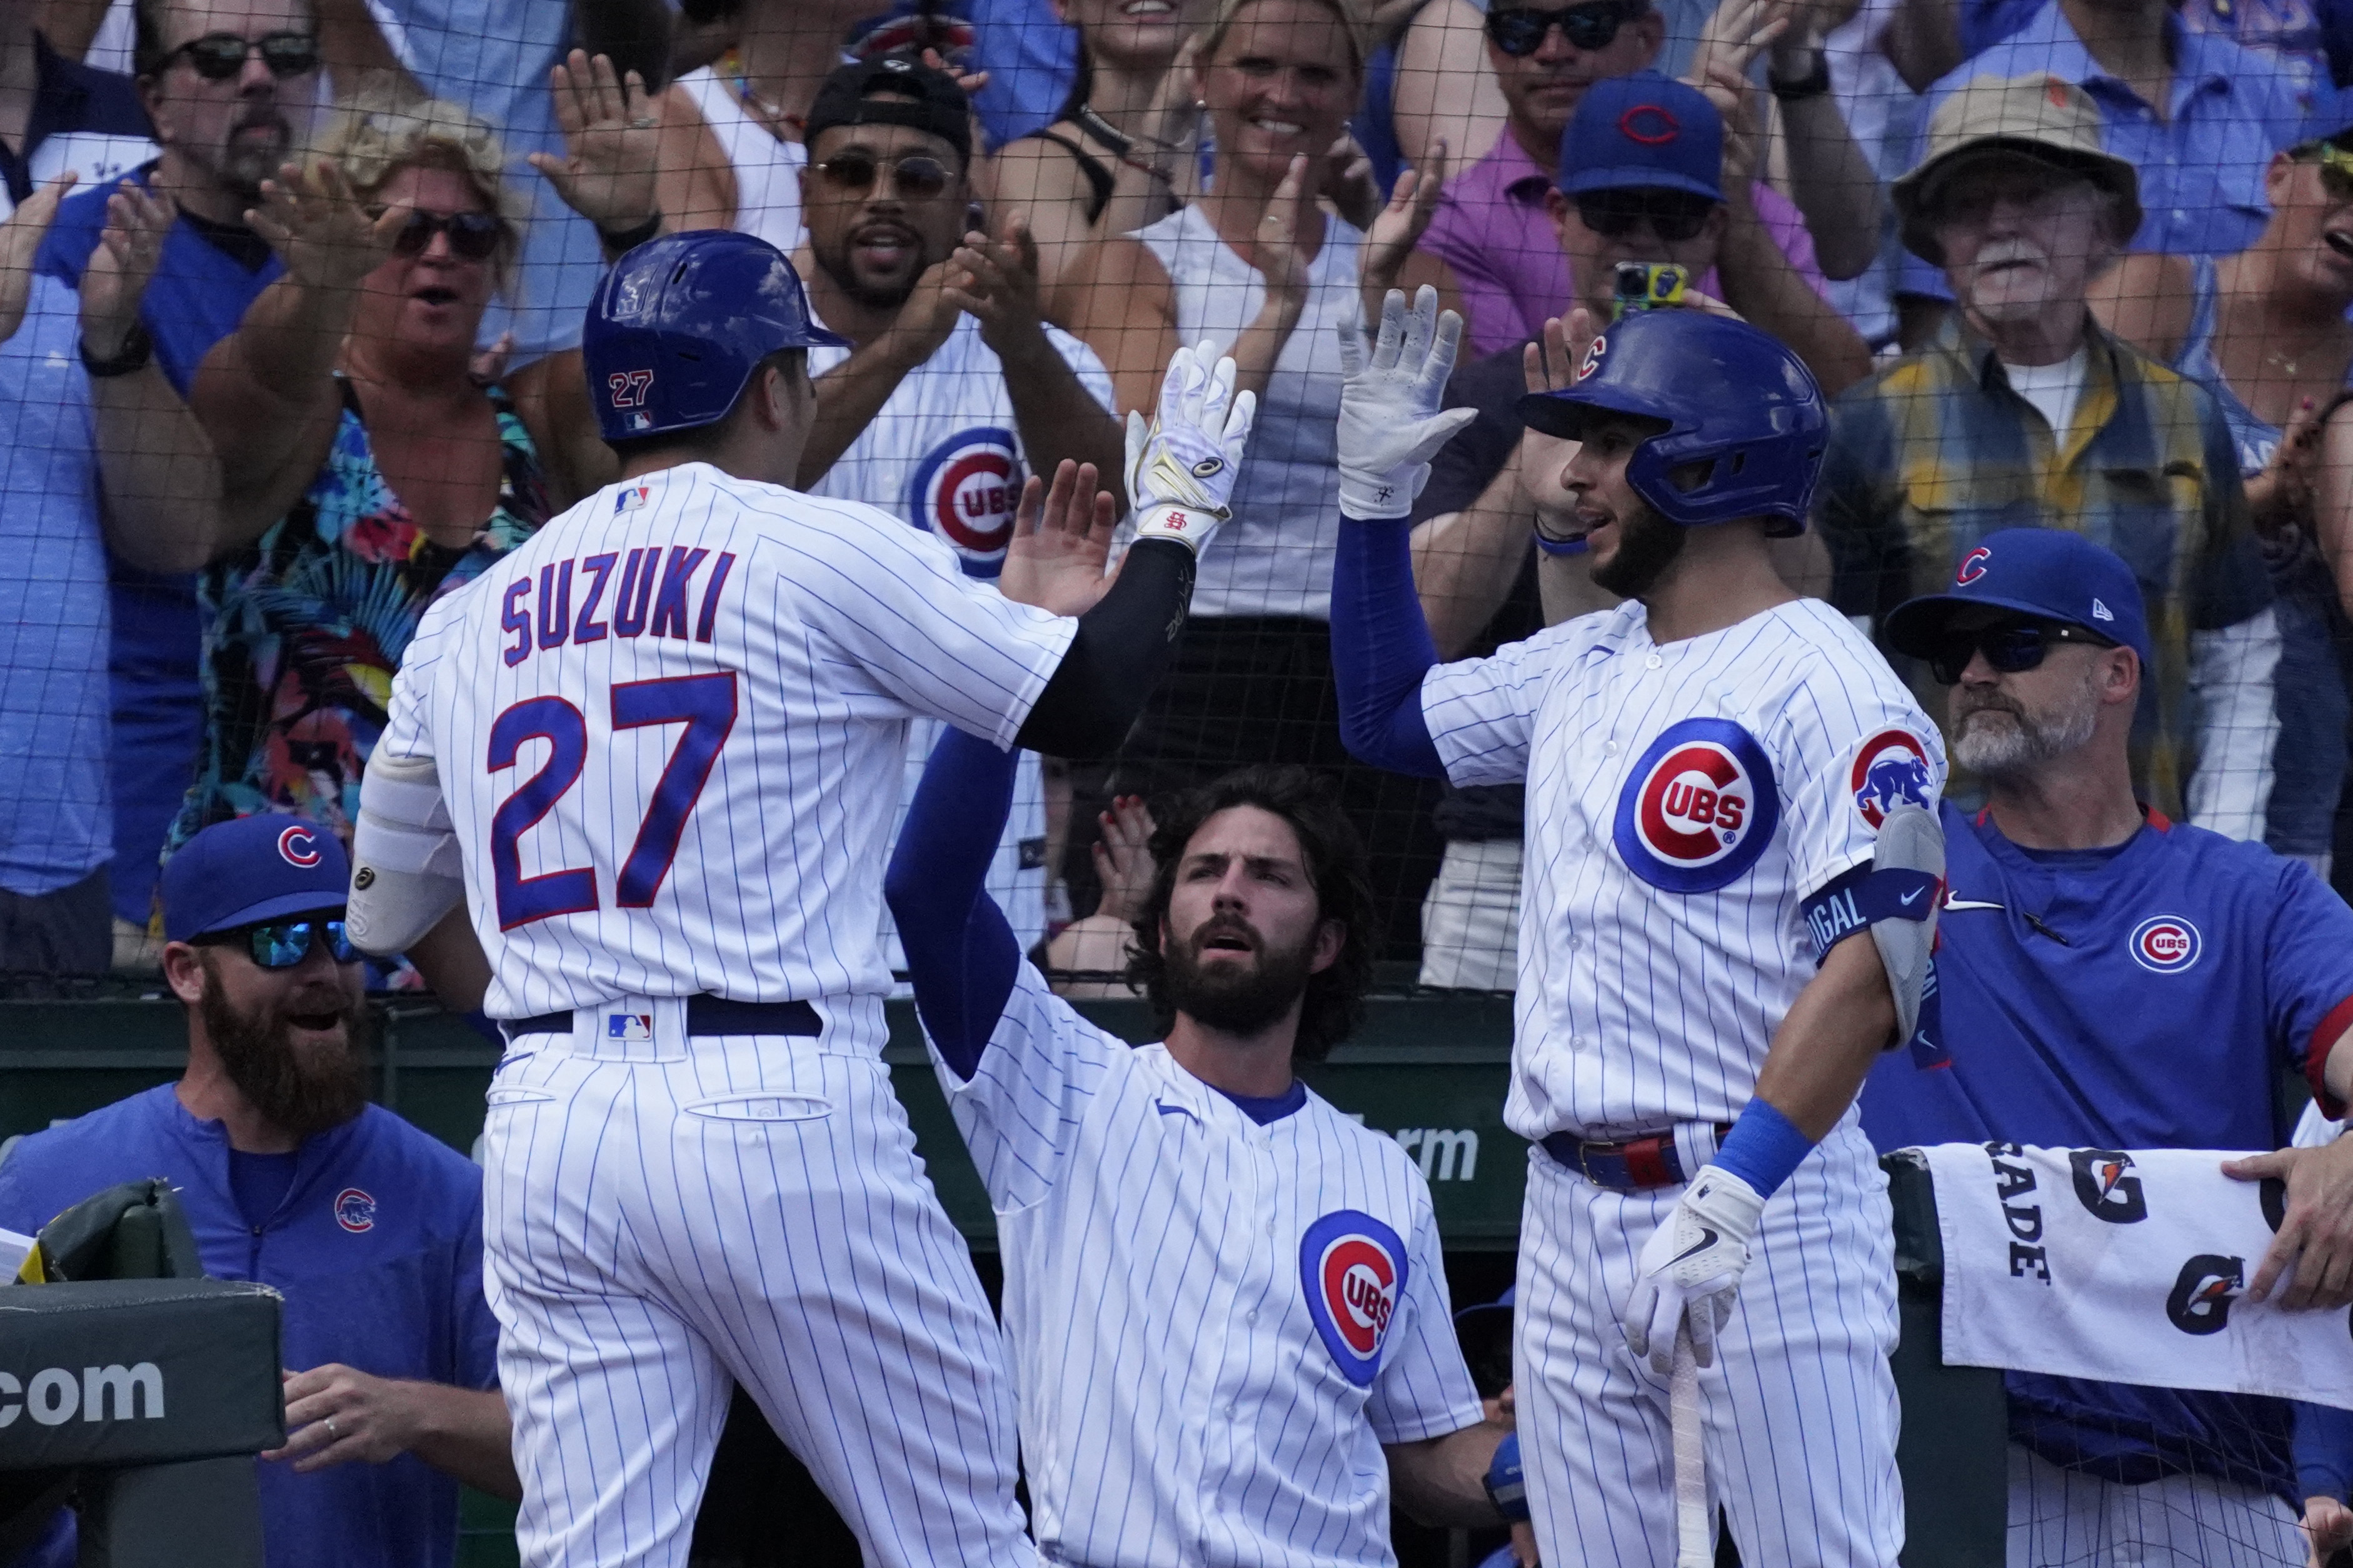 Cubs ace Steele throws career-high 12 strikeouts in dominant win